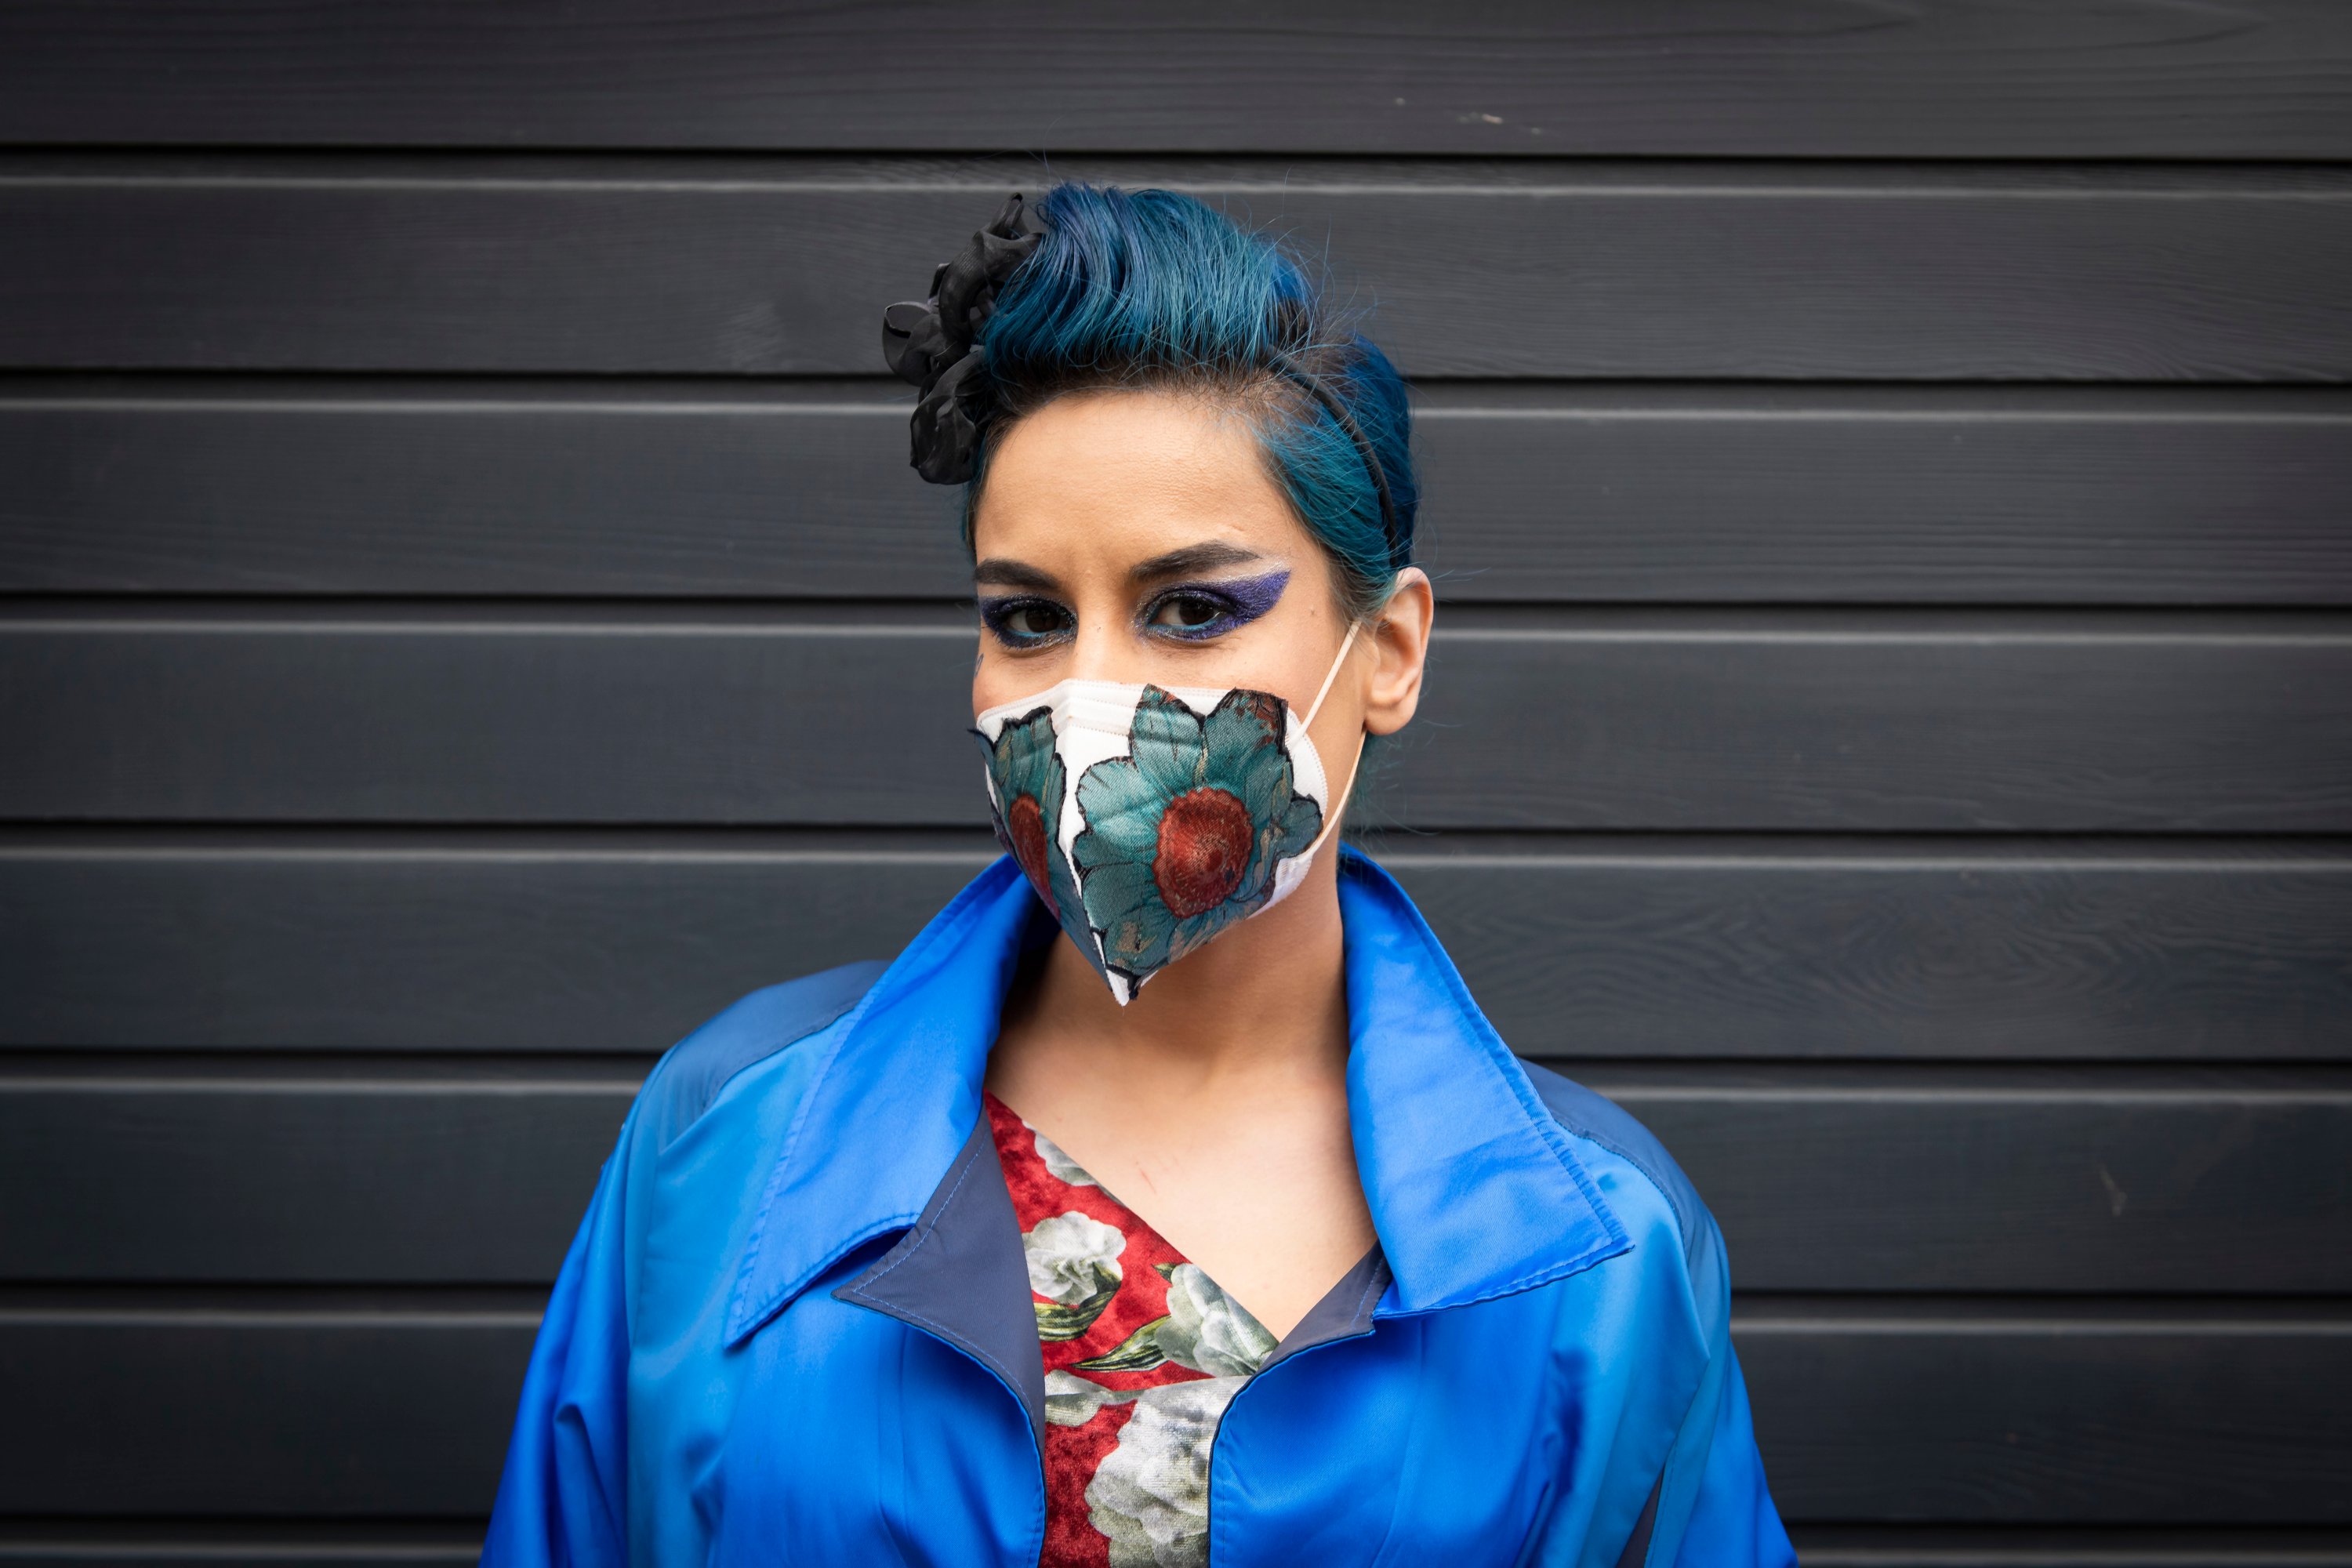 Fashion stylist Lily Moo wears her personally designed face mask during the Coronavirus outbreak, Victoria, London. (David Jensen/EMPICS Entertainment via Reuters)